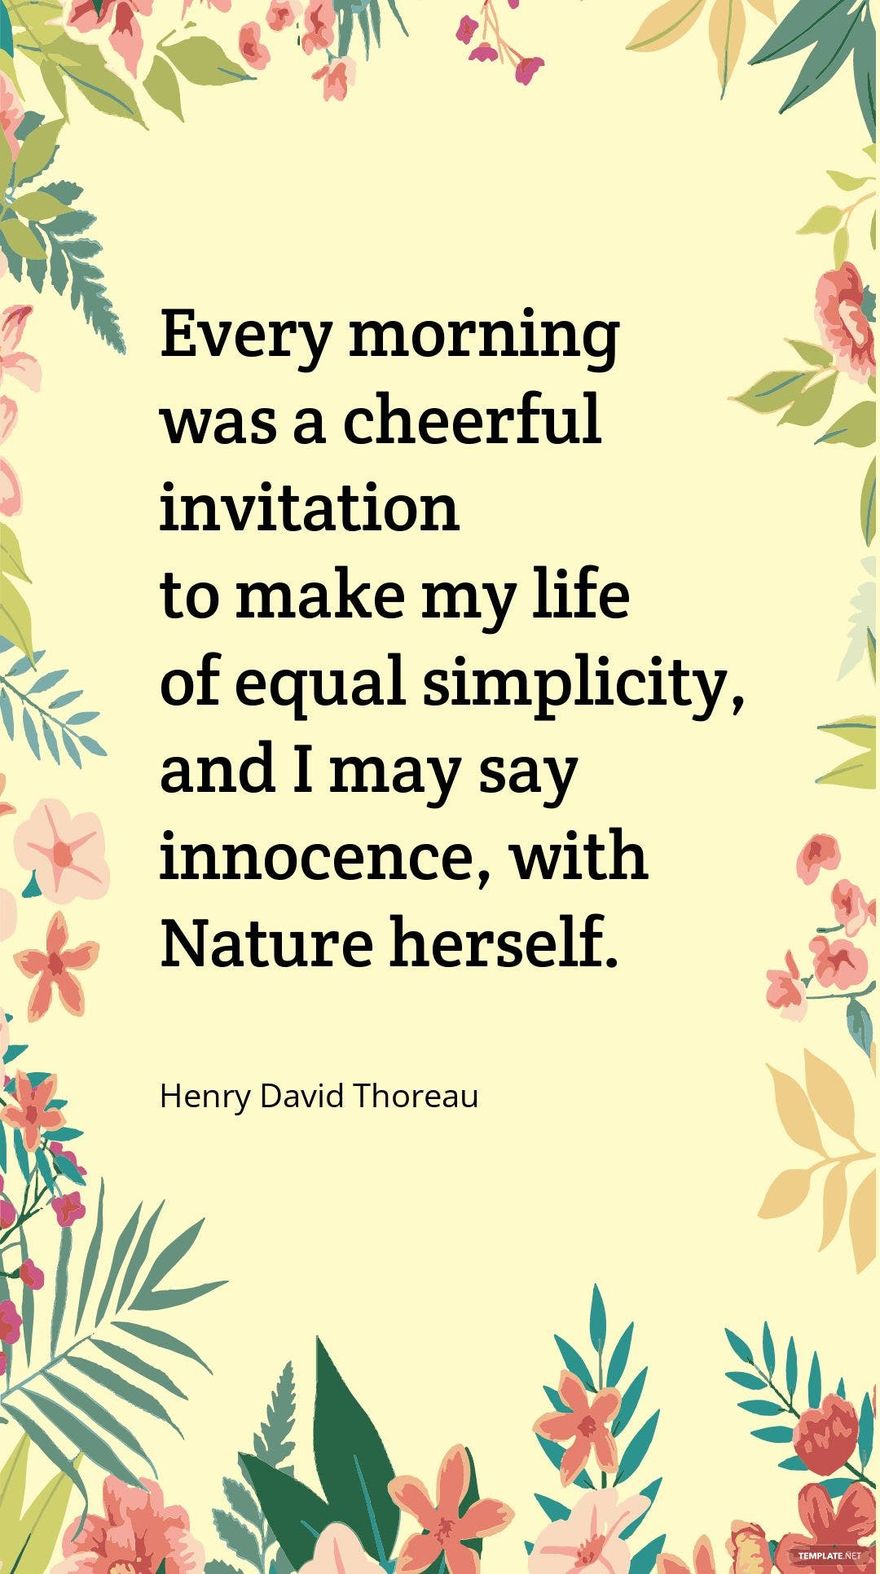 Henry David Thoreau - Every morning was a cheerful invitation to make my life of equal simplicity, and I may say innocence, with Nature herself. Template